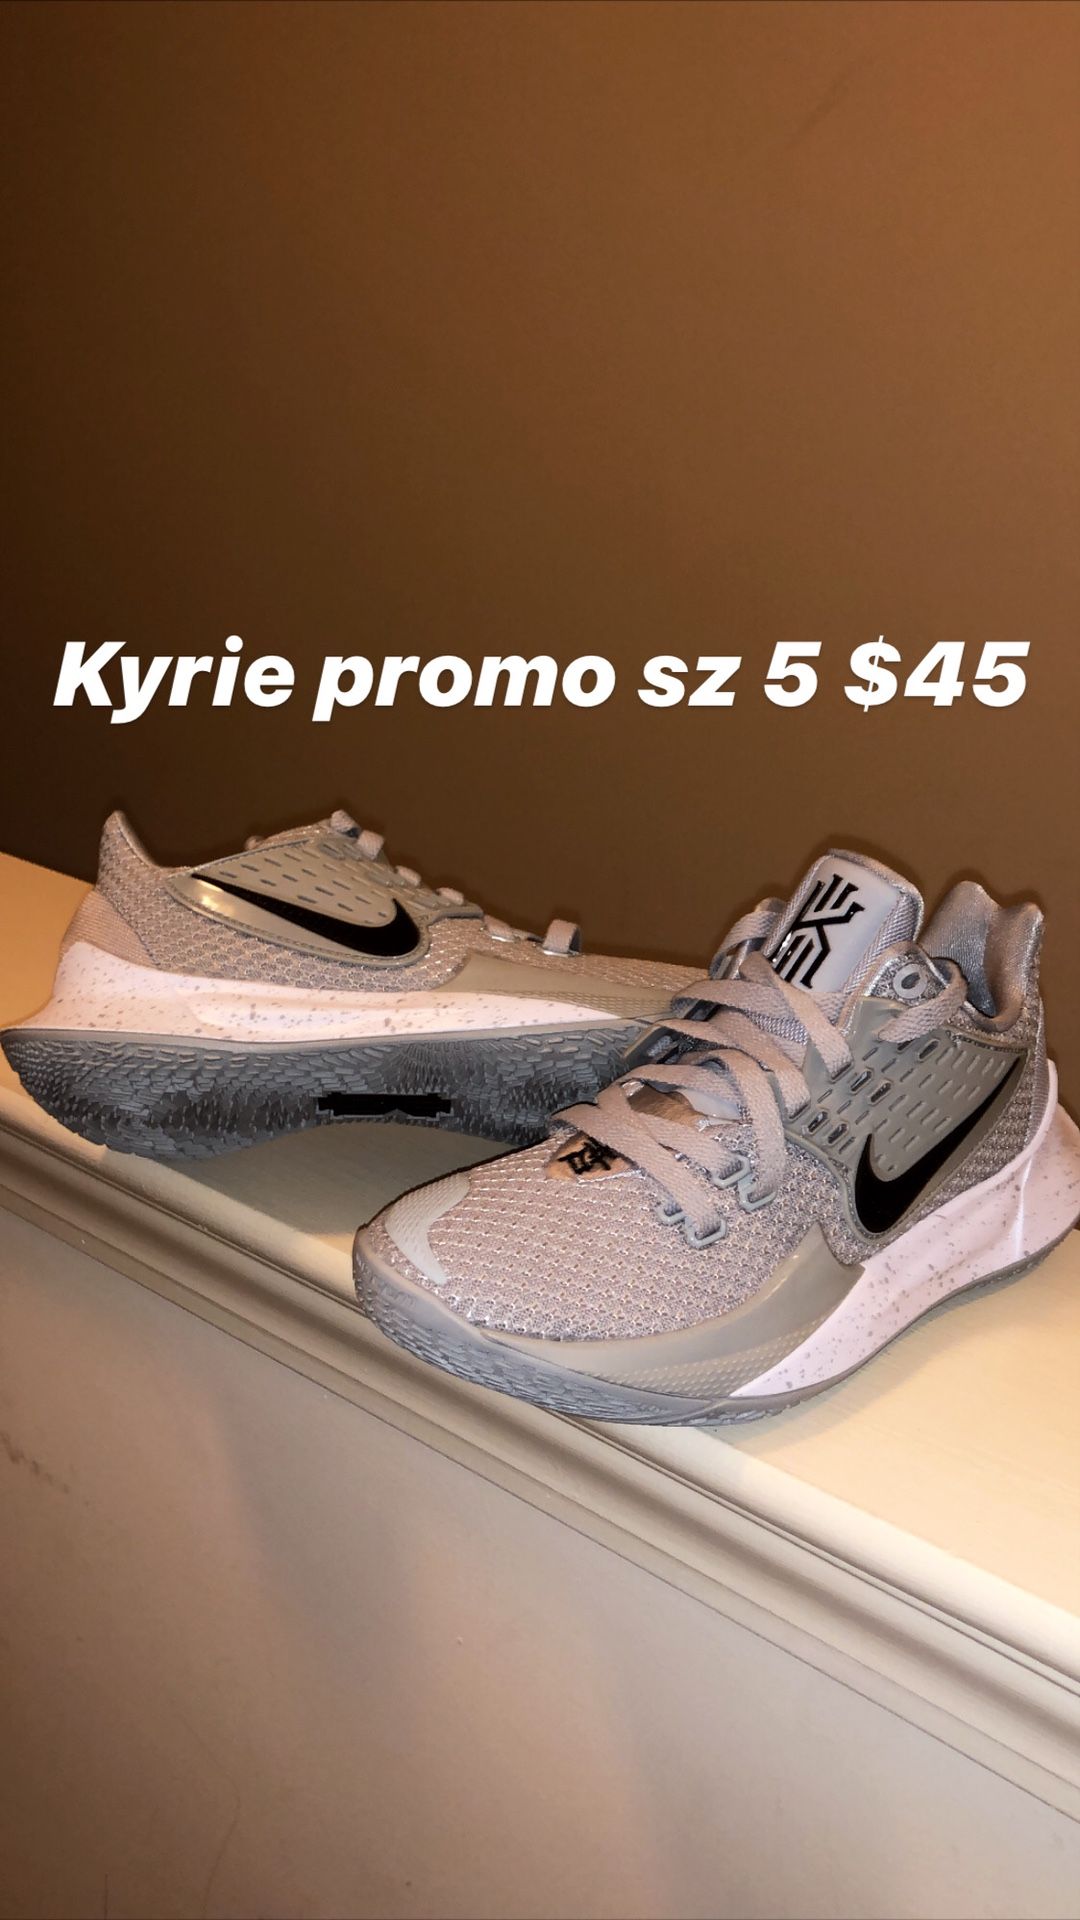 Brand new Nike kyrie irving Promo size 5 $40